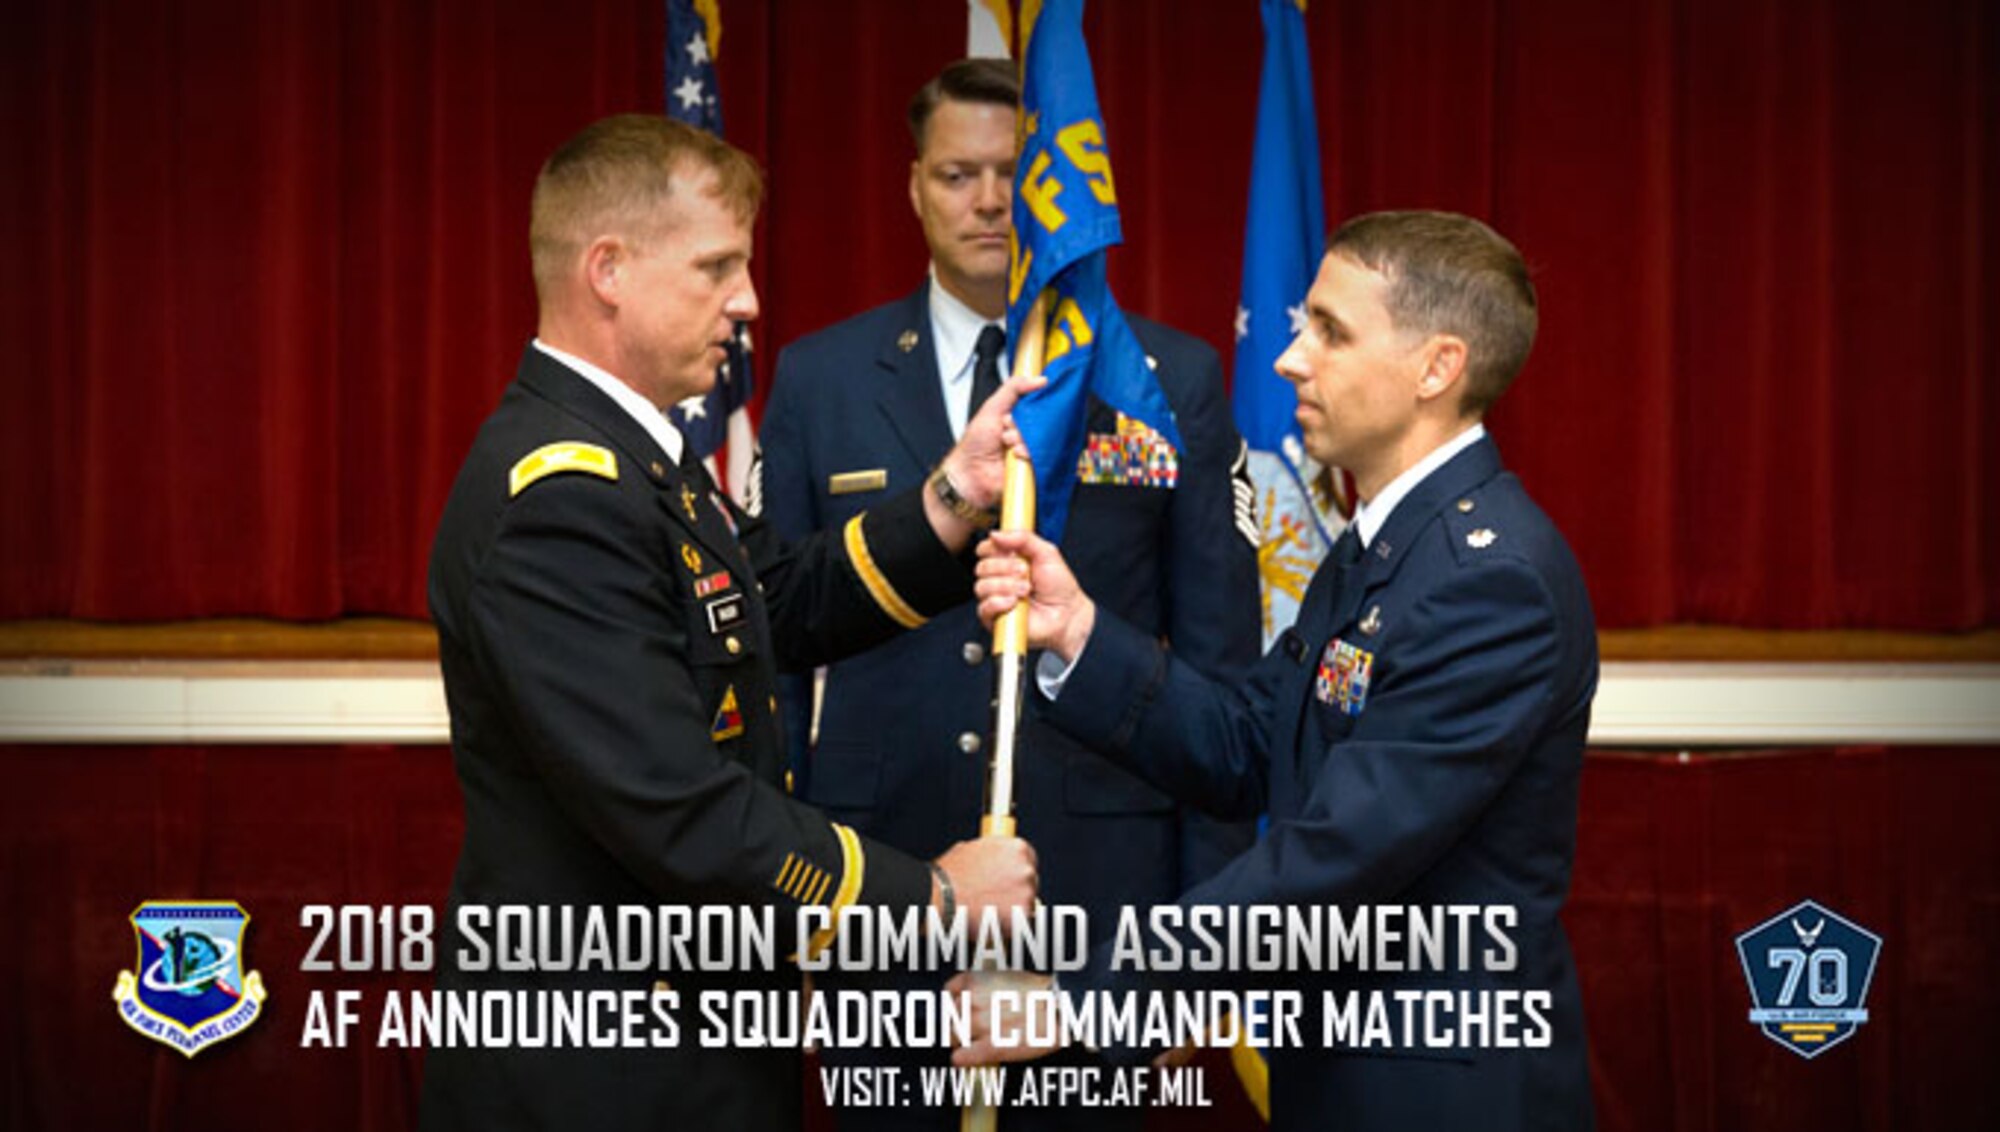 Squadron command selection list released for 2018